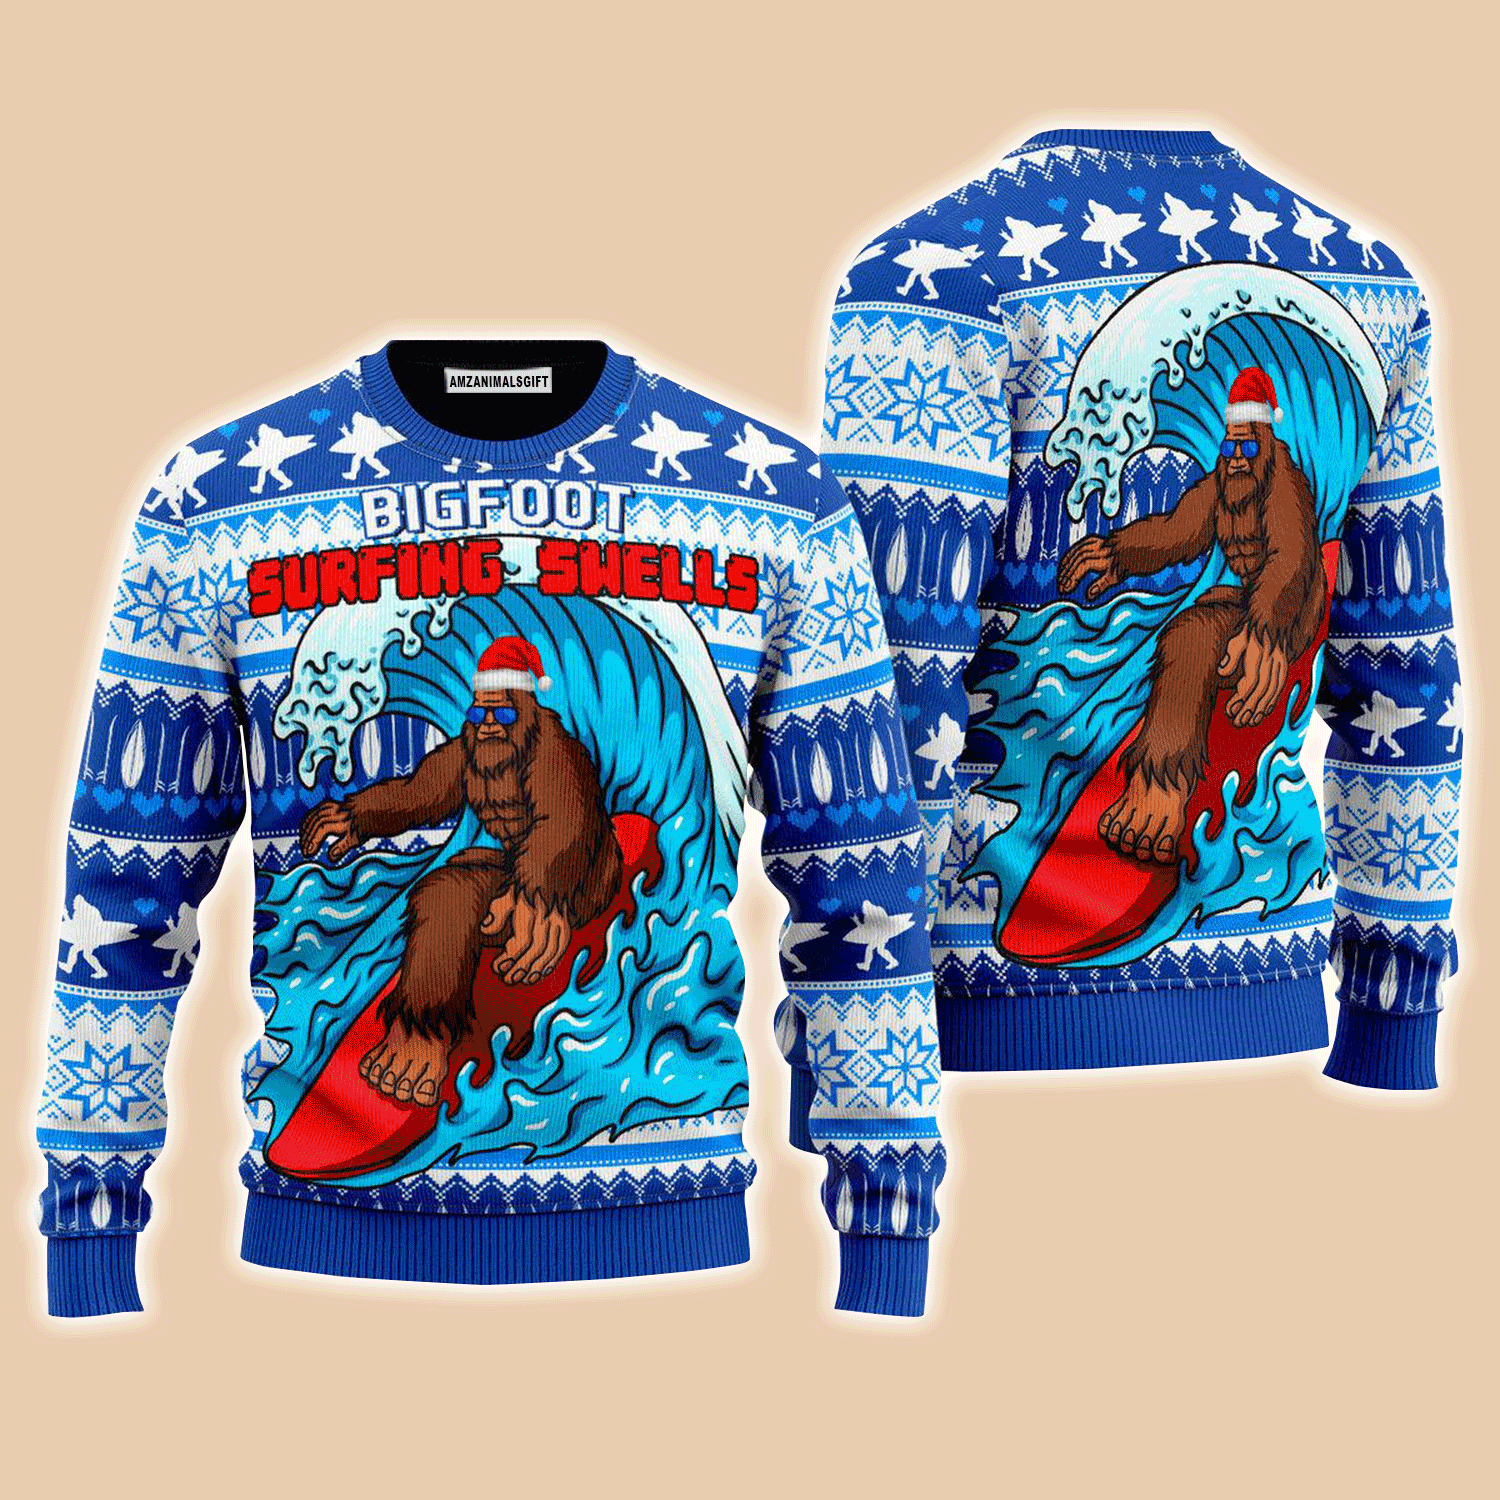 Bigfoot Surfing Swells Sweater, Ugly Christmas Sweater For Men & Women, Perfect Outfit For Christmas New Year Autumn Winter